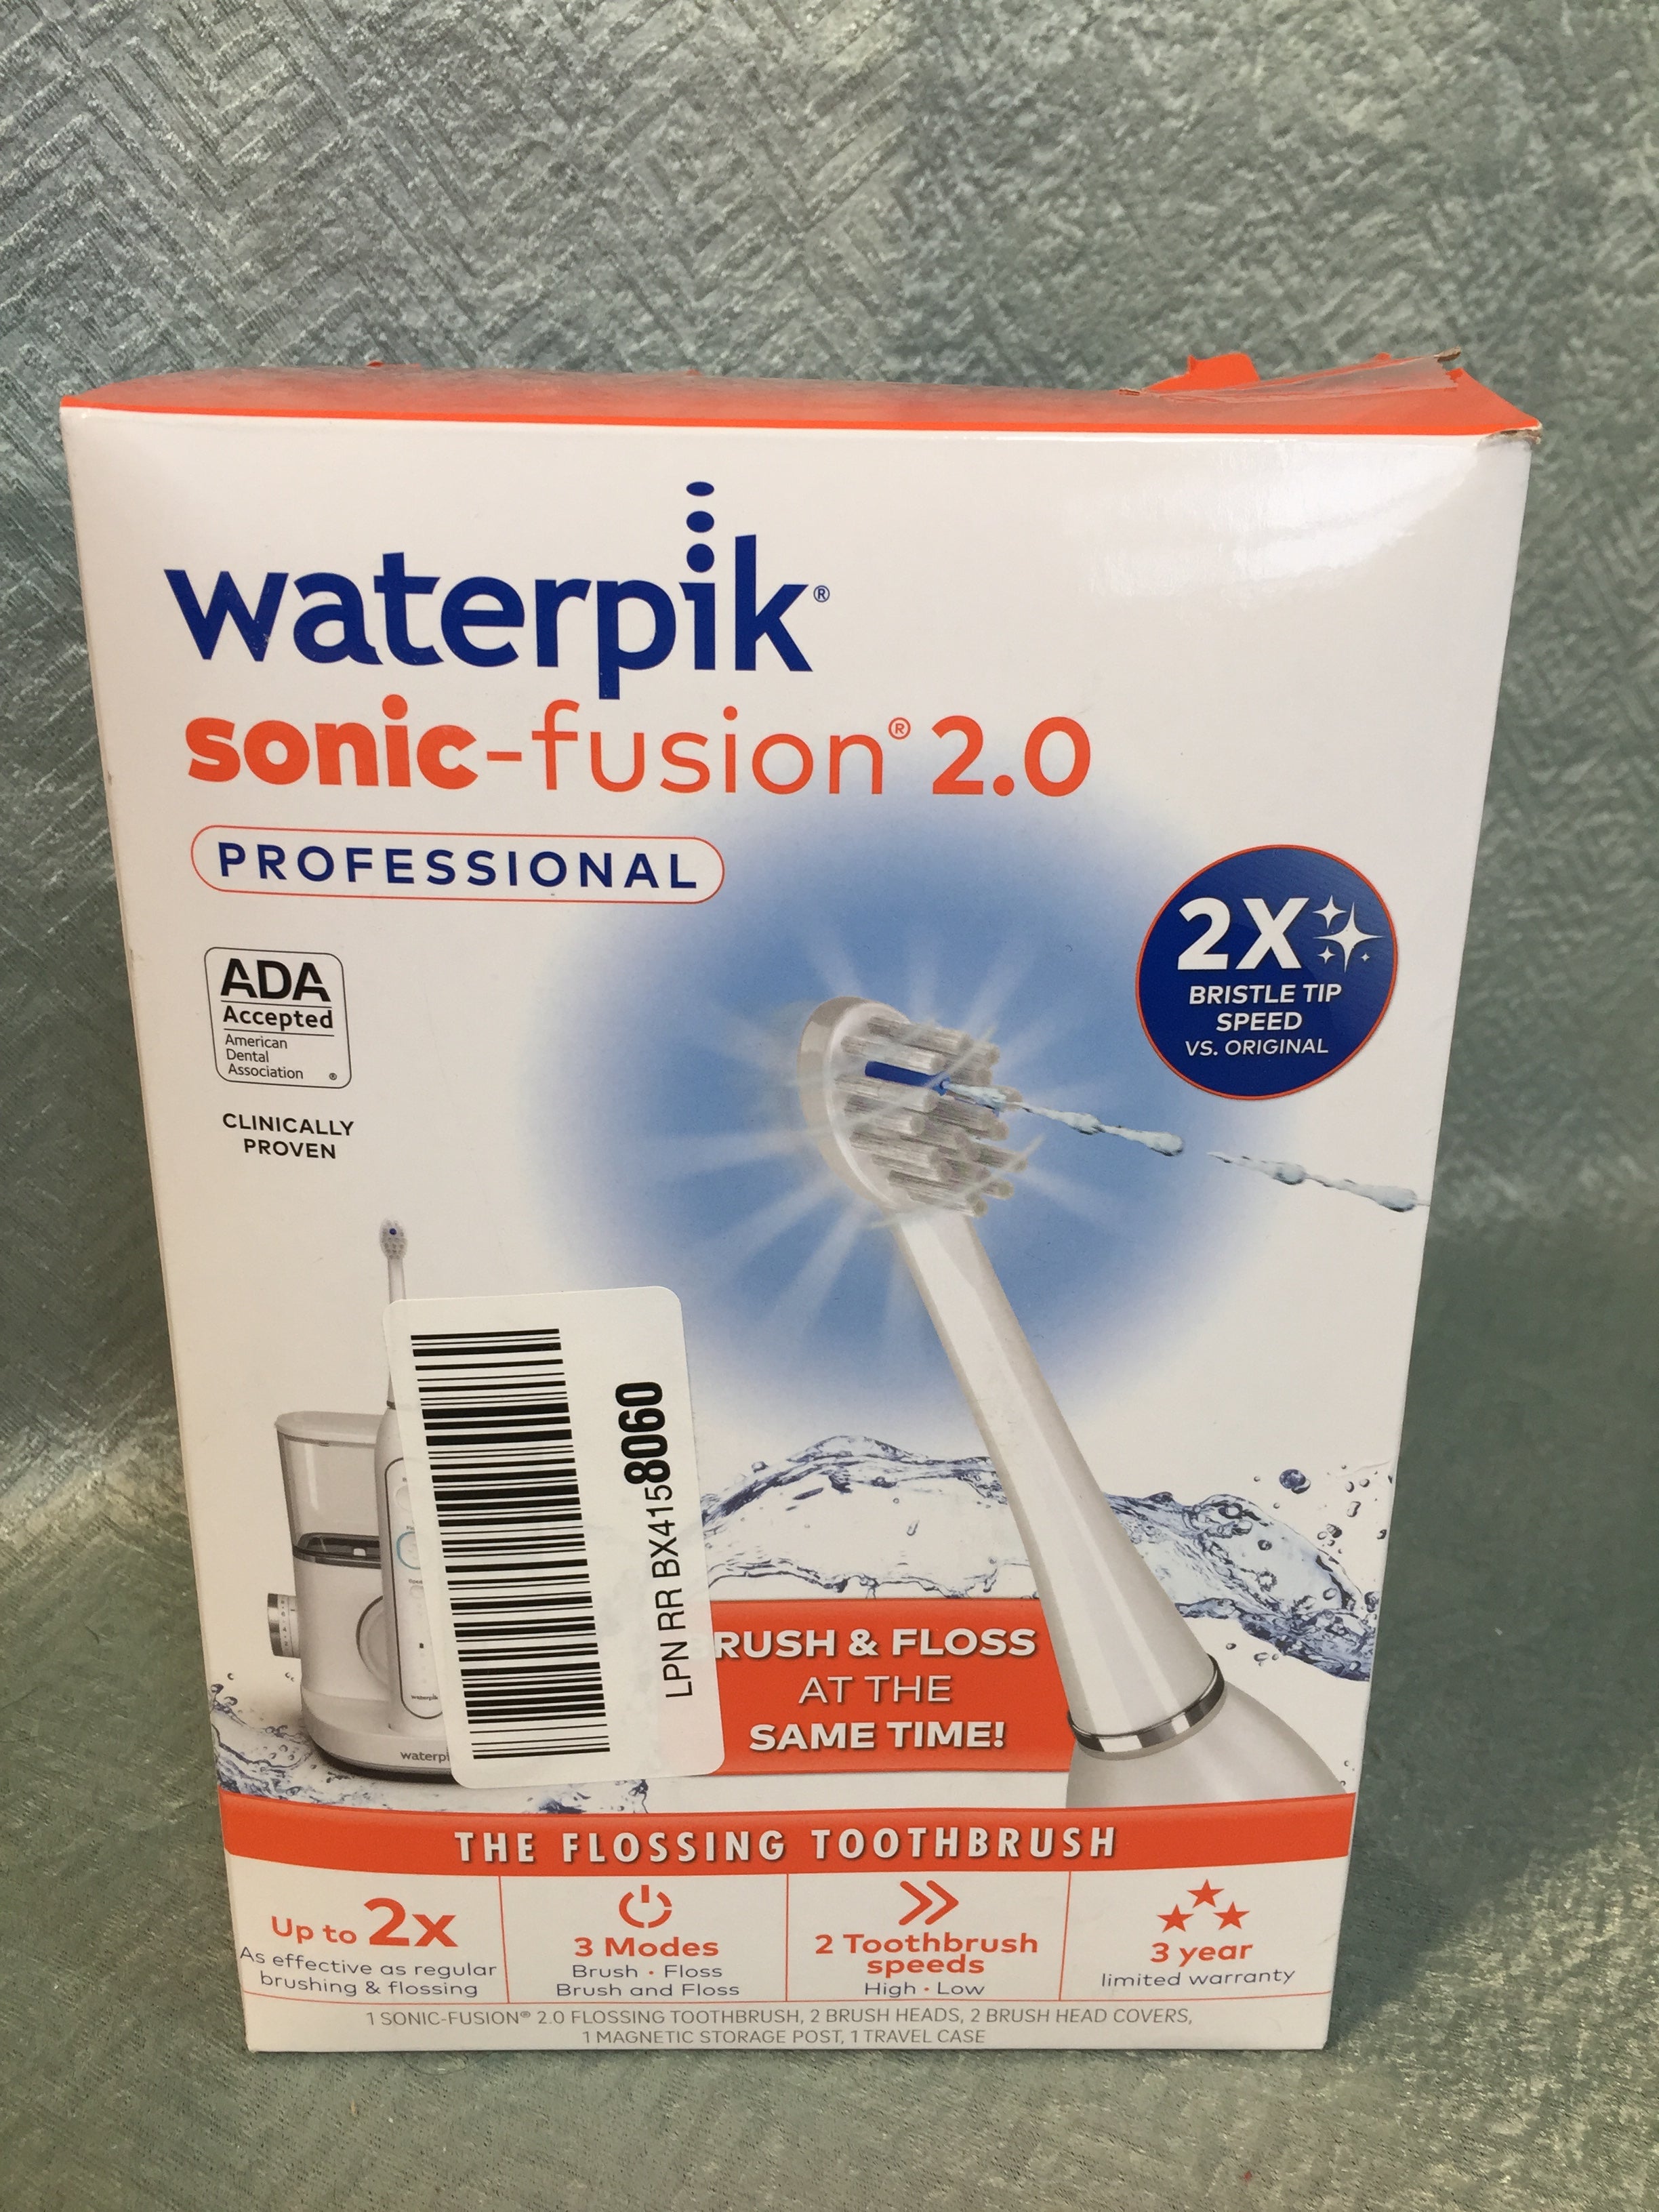 Waterpik Sonic-Fusion 2.0 Professional Flossing Toothbrush - White - SF04 (7609039847662)